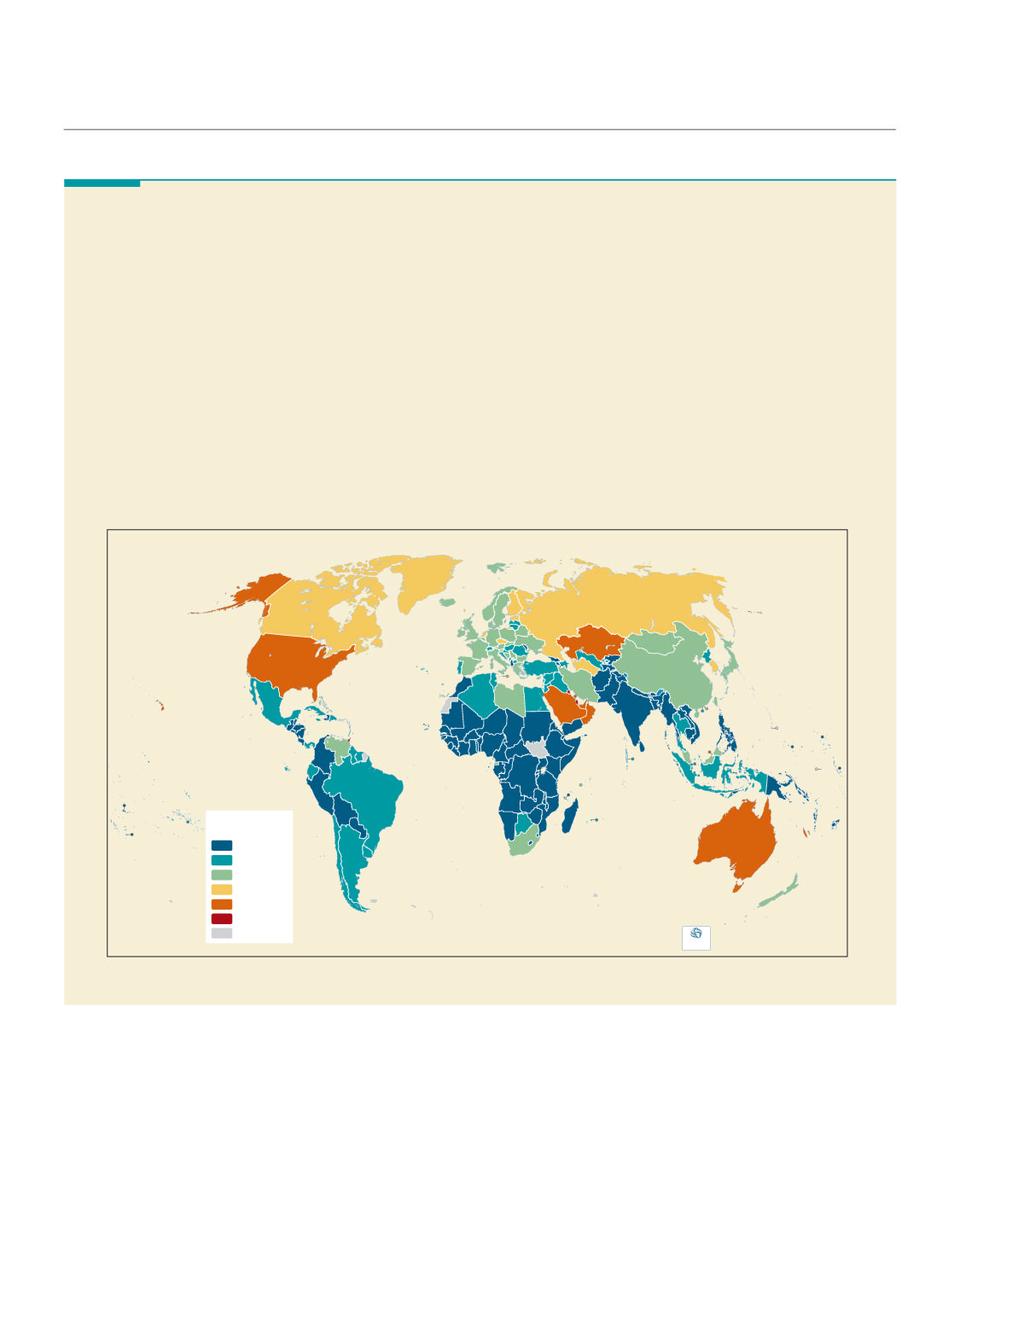 186 DEMOGRAPHIC CHANGE: PATHWAYS TO PROSPERITY GLOBAL MONITORING REPORT 215/216 BOX 5.